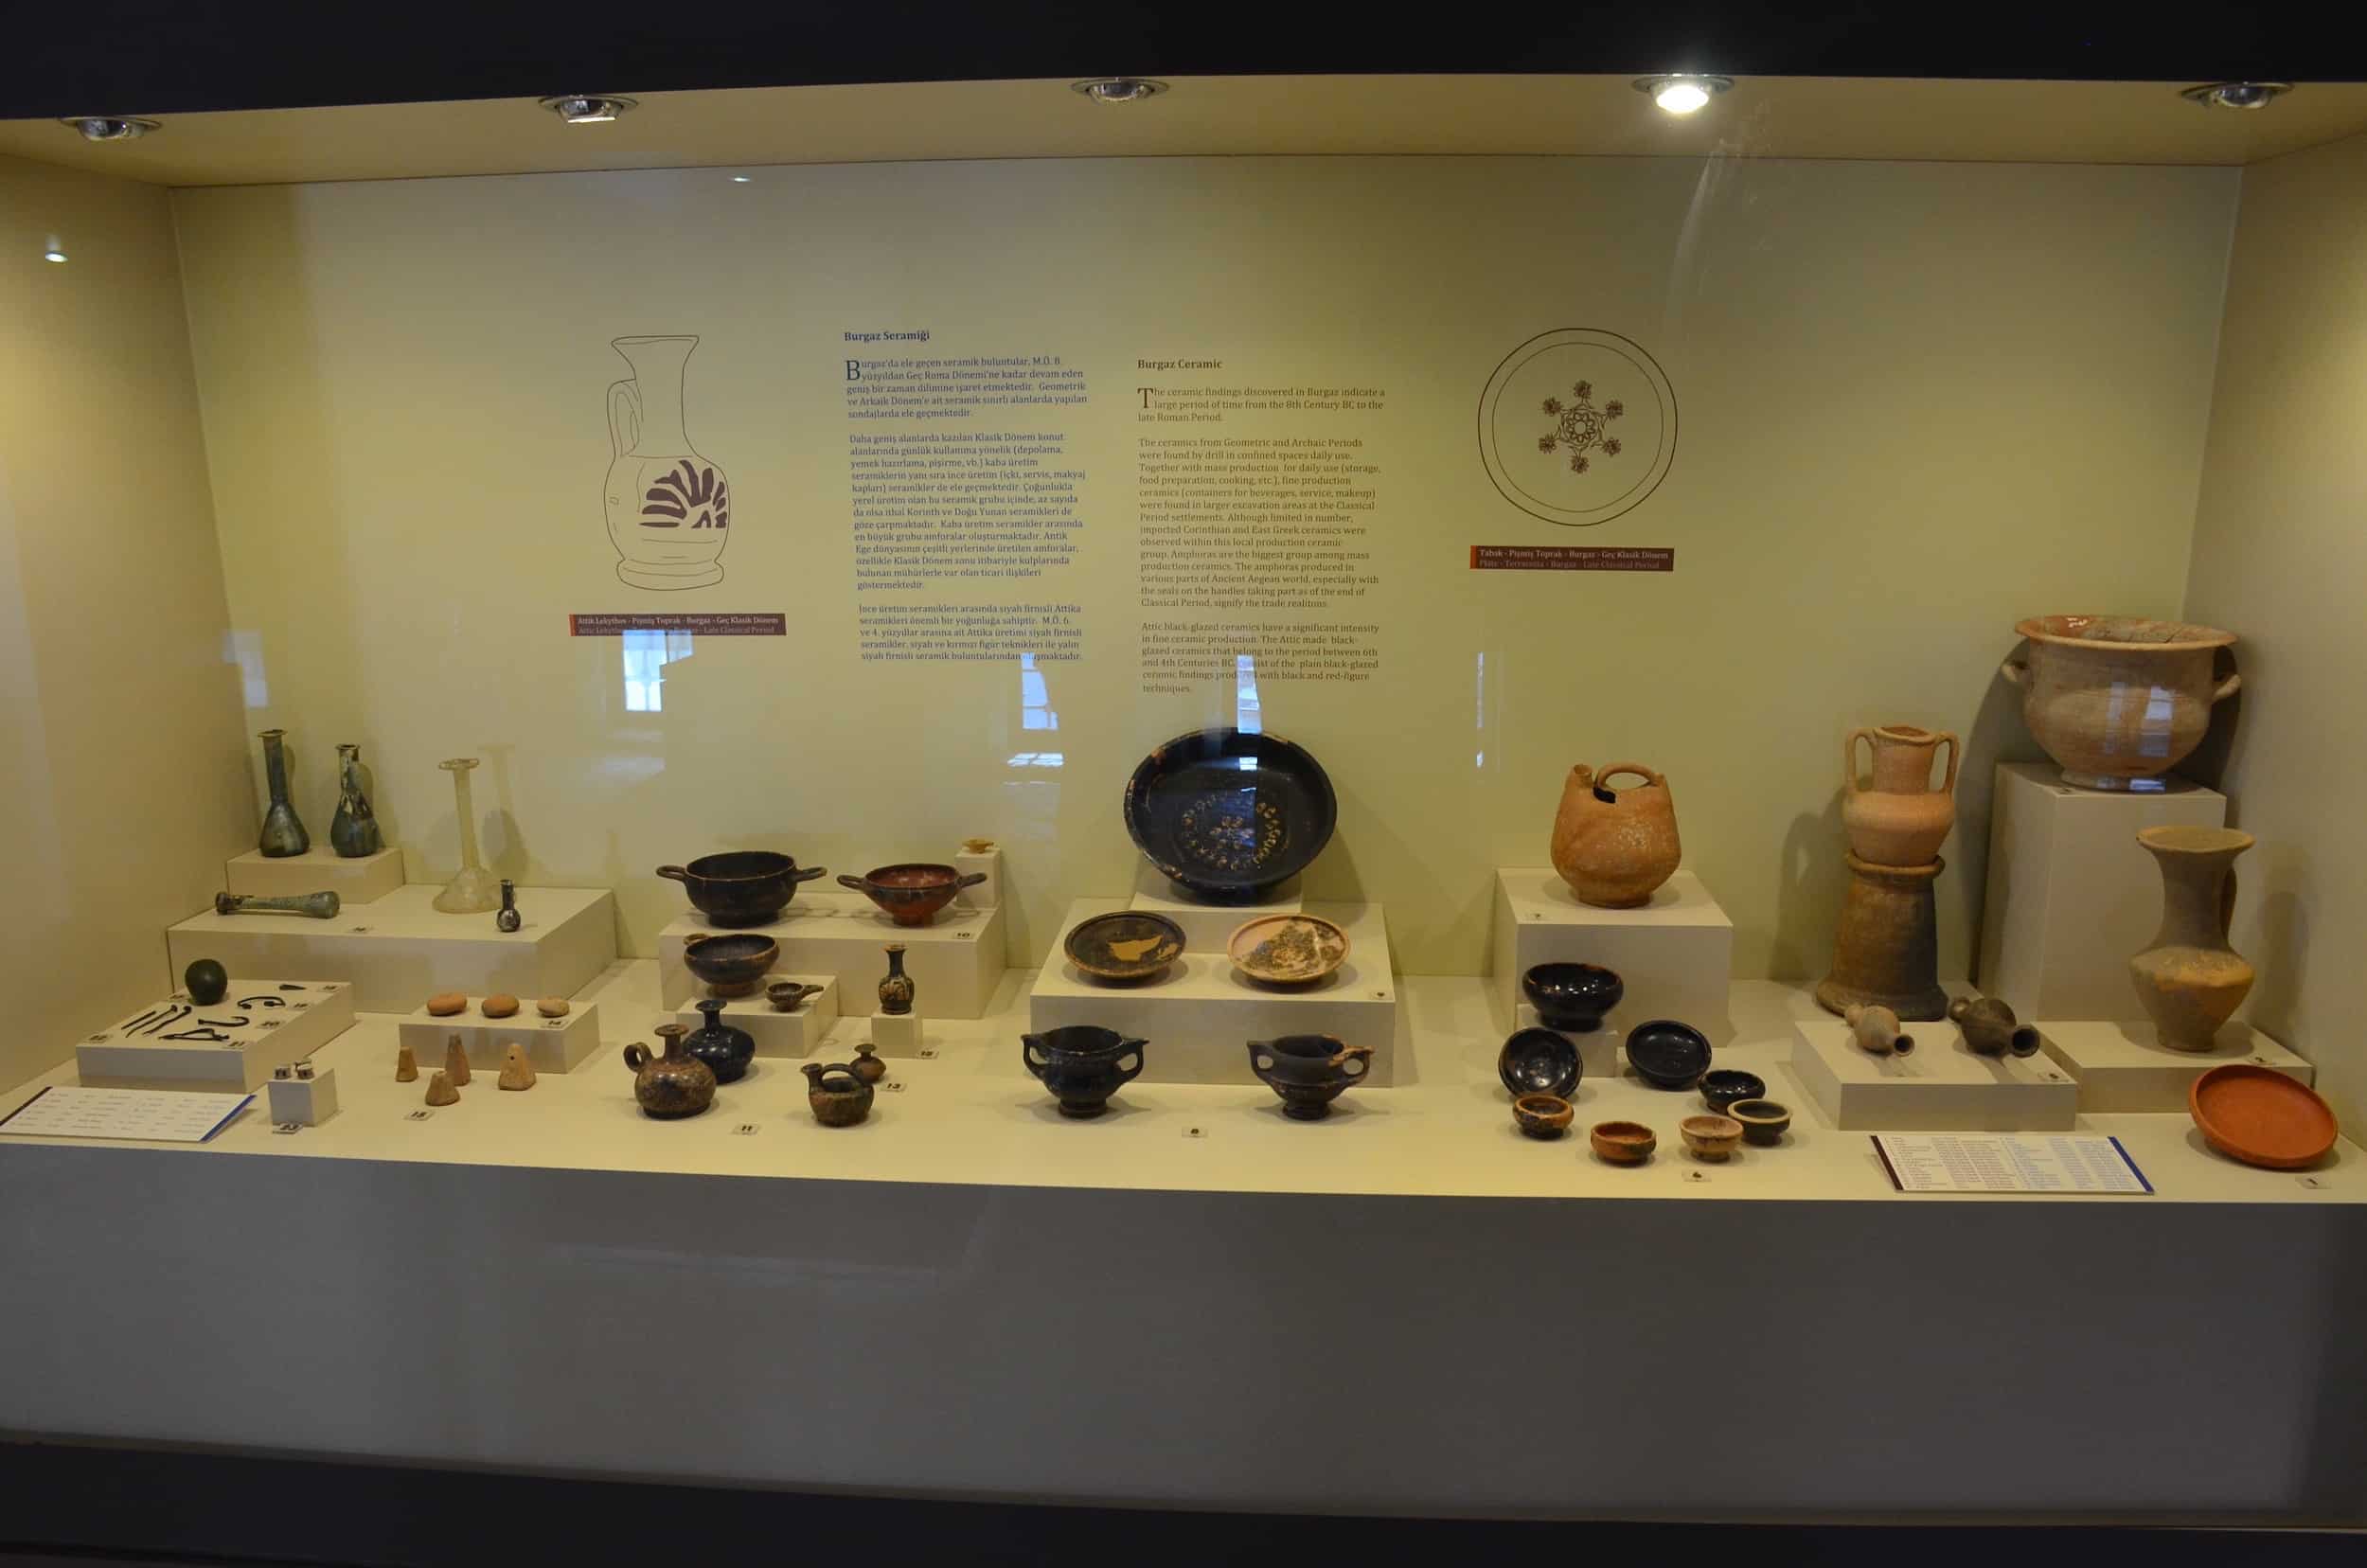 Ceramic findings from Burgaz, 8th century BC to the Roman period at the Emecik-Burgaz Hall at the Marmaris Museum